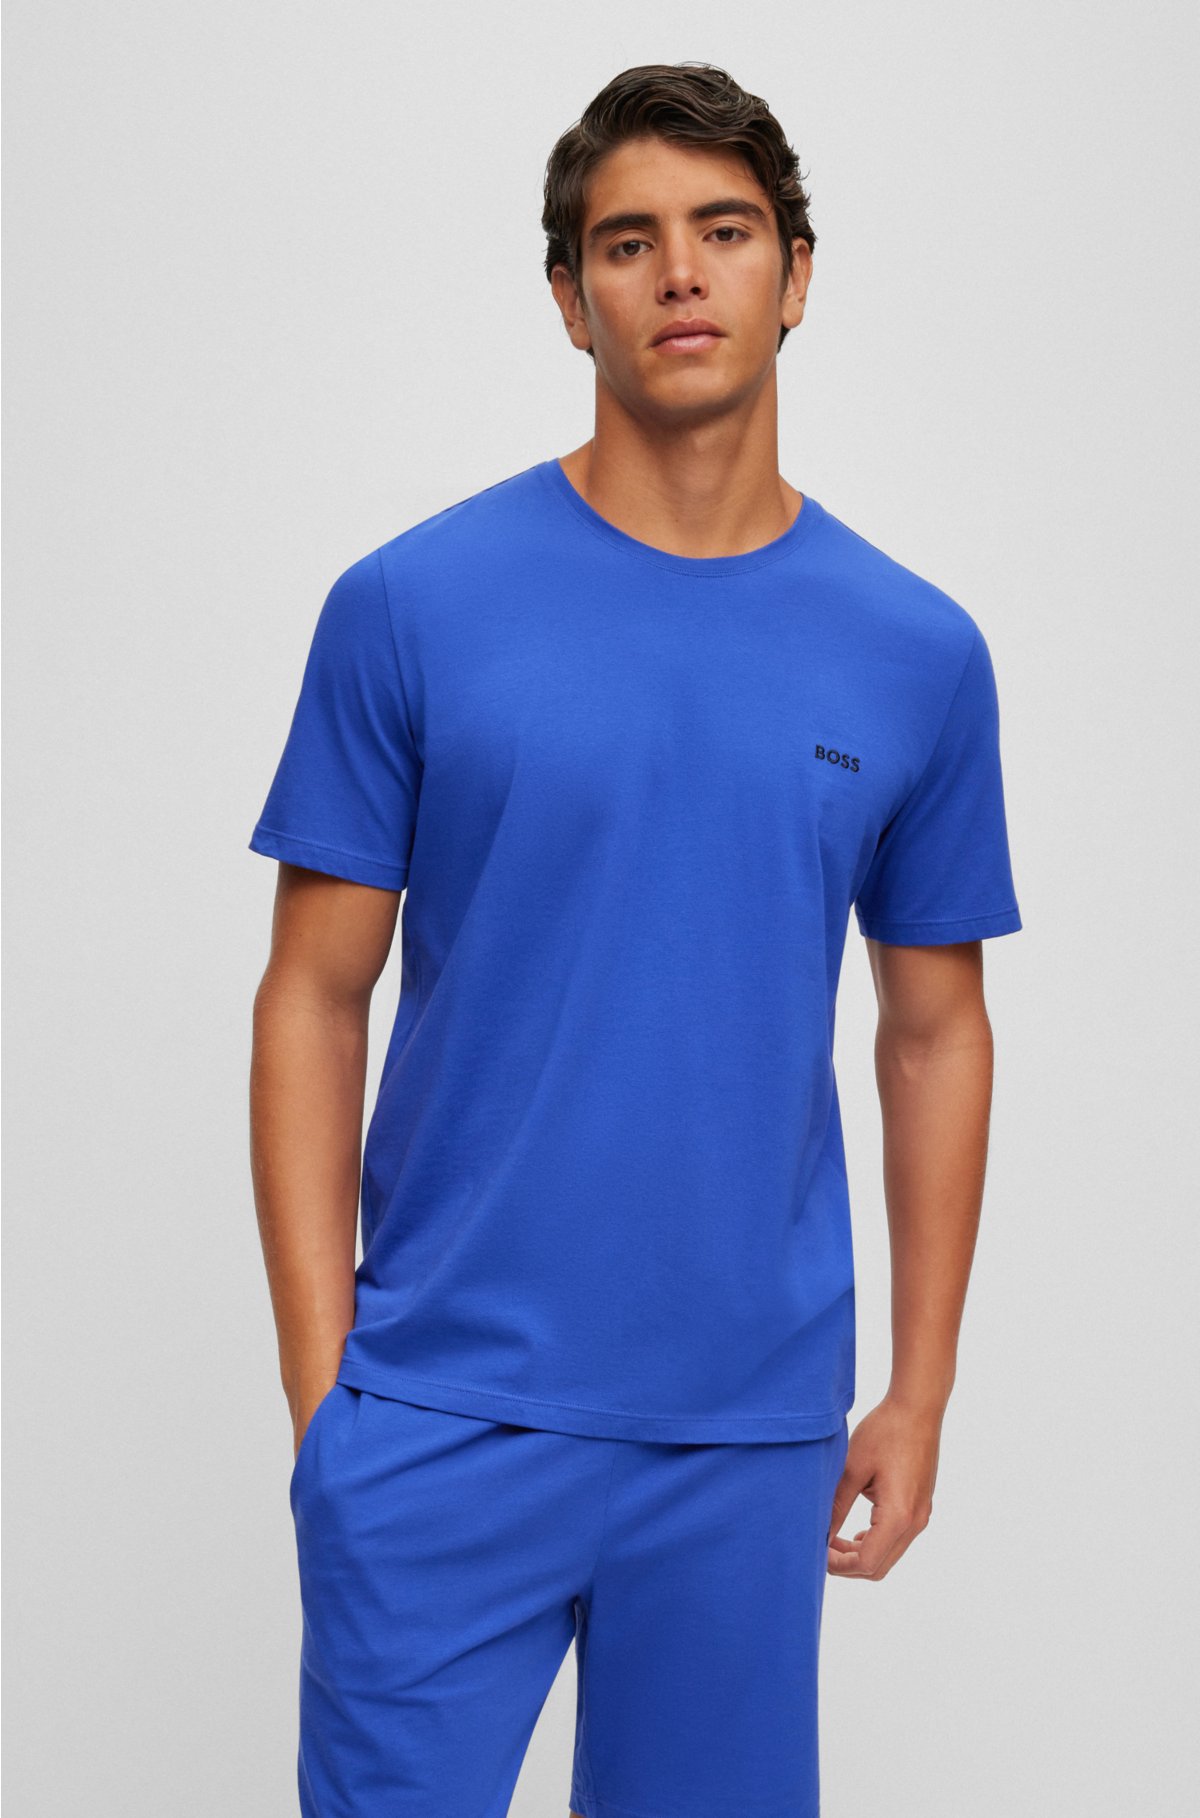 BOSS - Loungewear T-shirt in stretch cotton with contrast logo